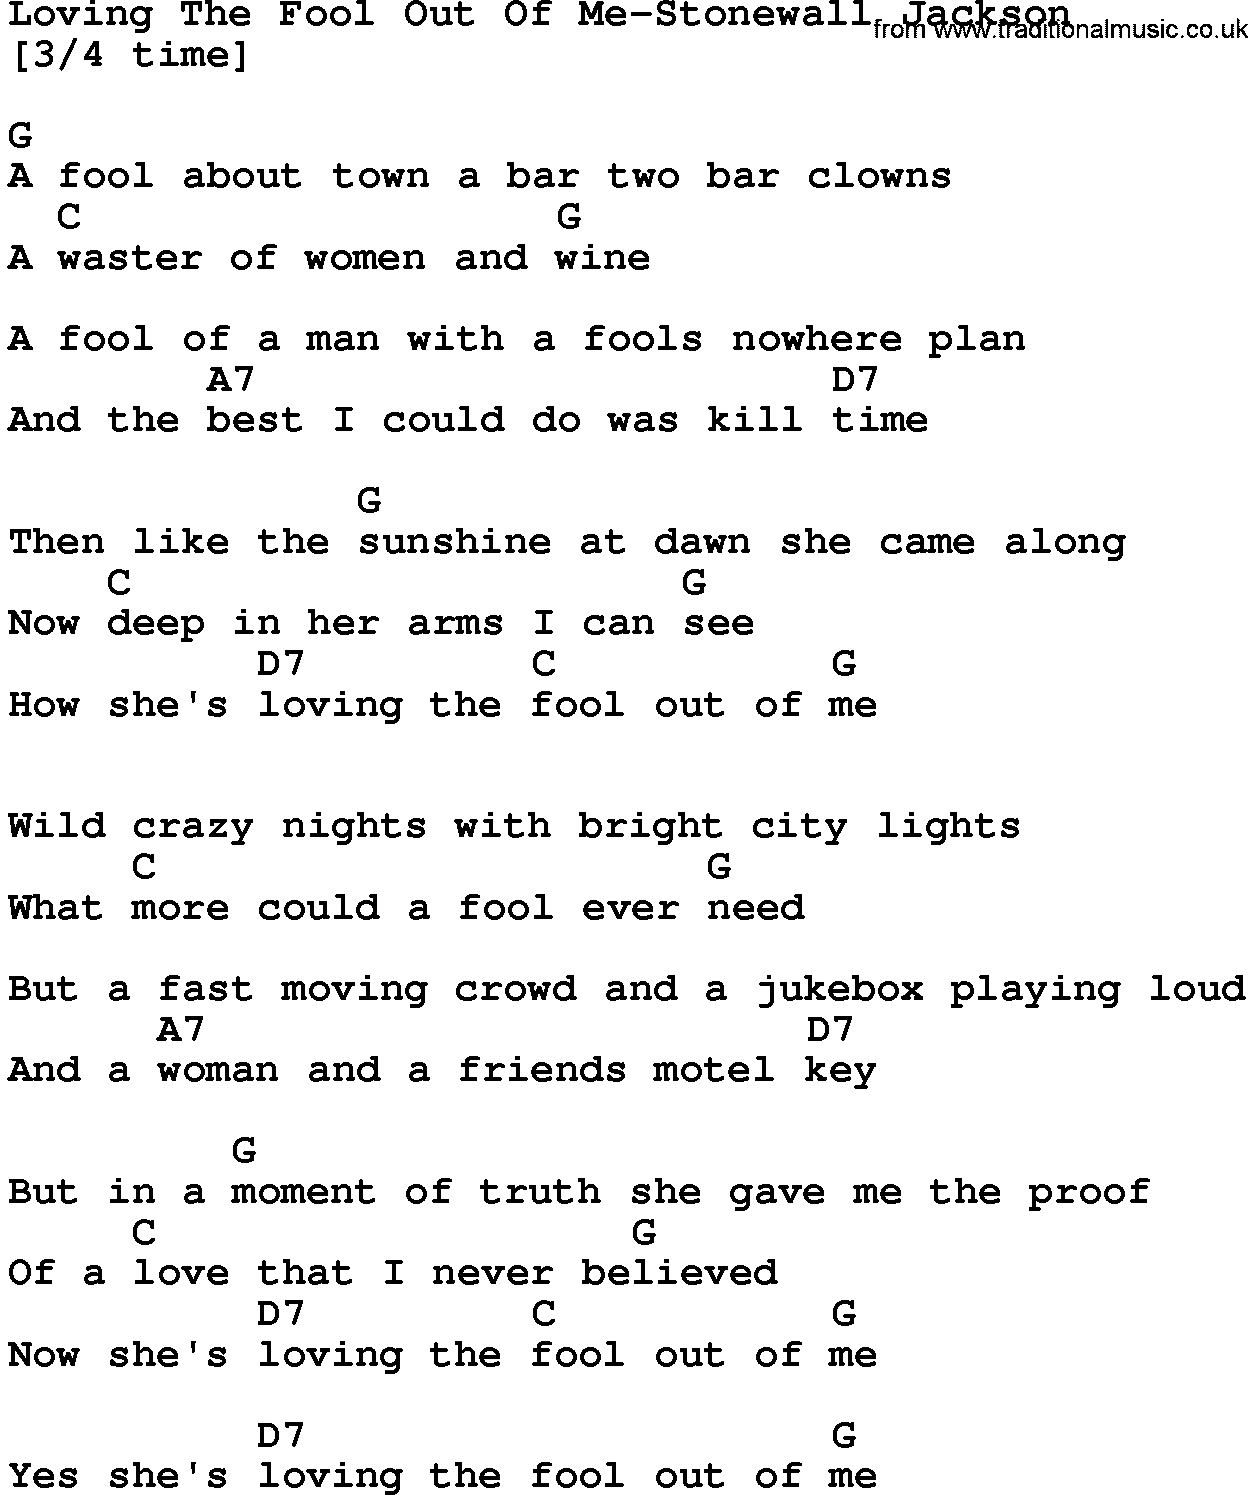 Country music song: Loving The Fool Out Of Me-Stonewall Jackson lyrics and chords